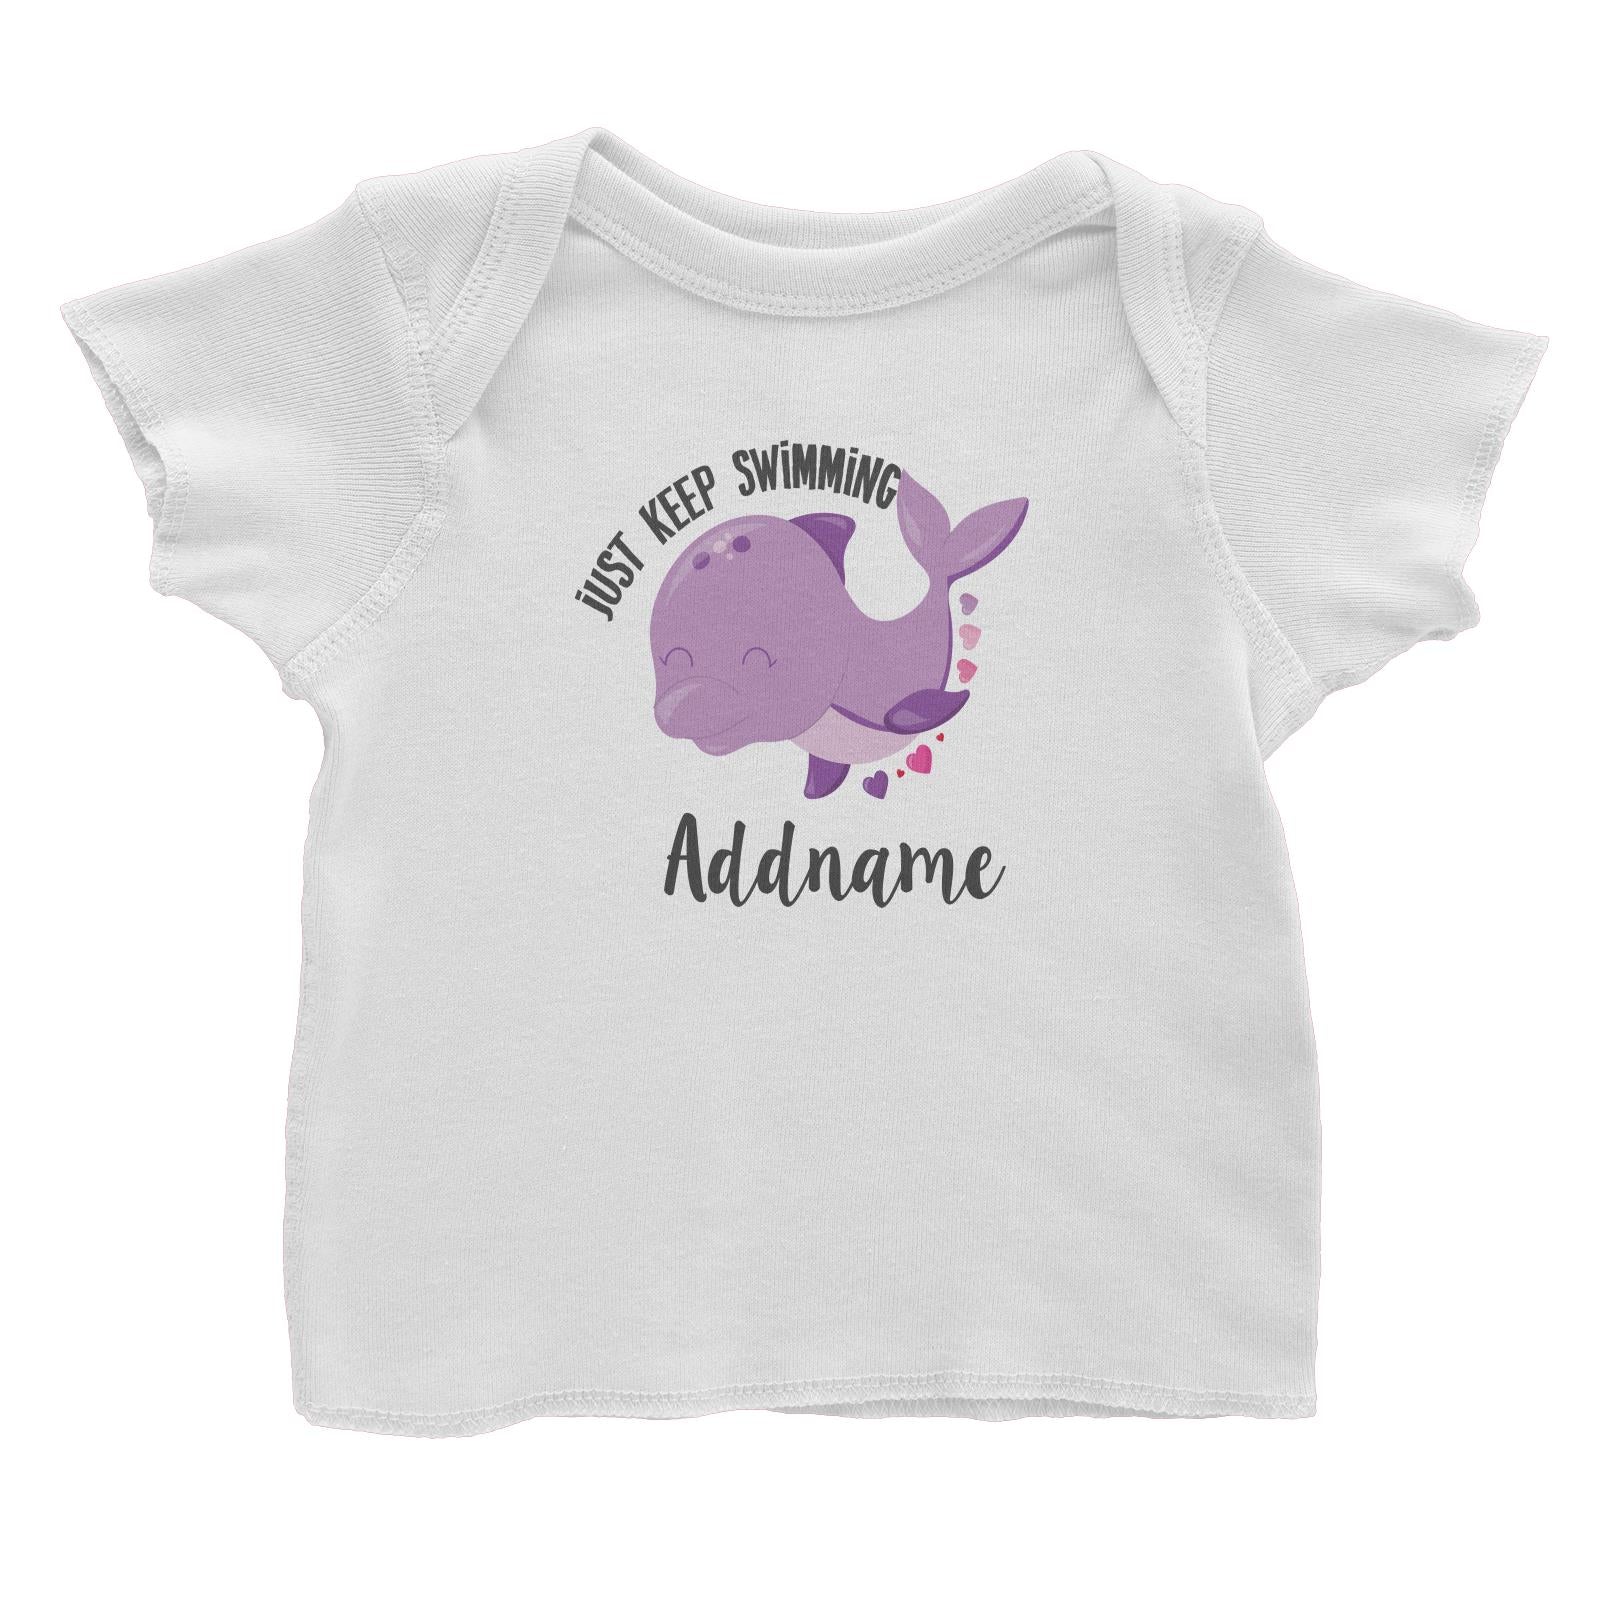 Cute Sea Animals Dolphin Just Keep Swimming Addname Baby T-Shirt